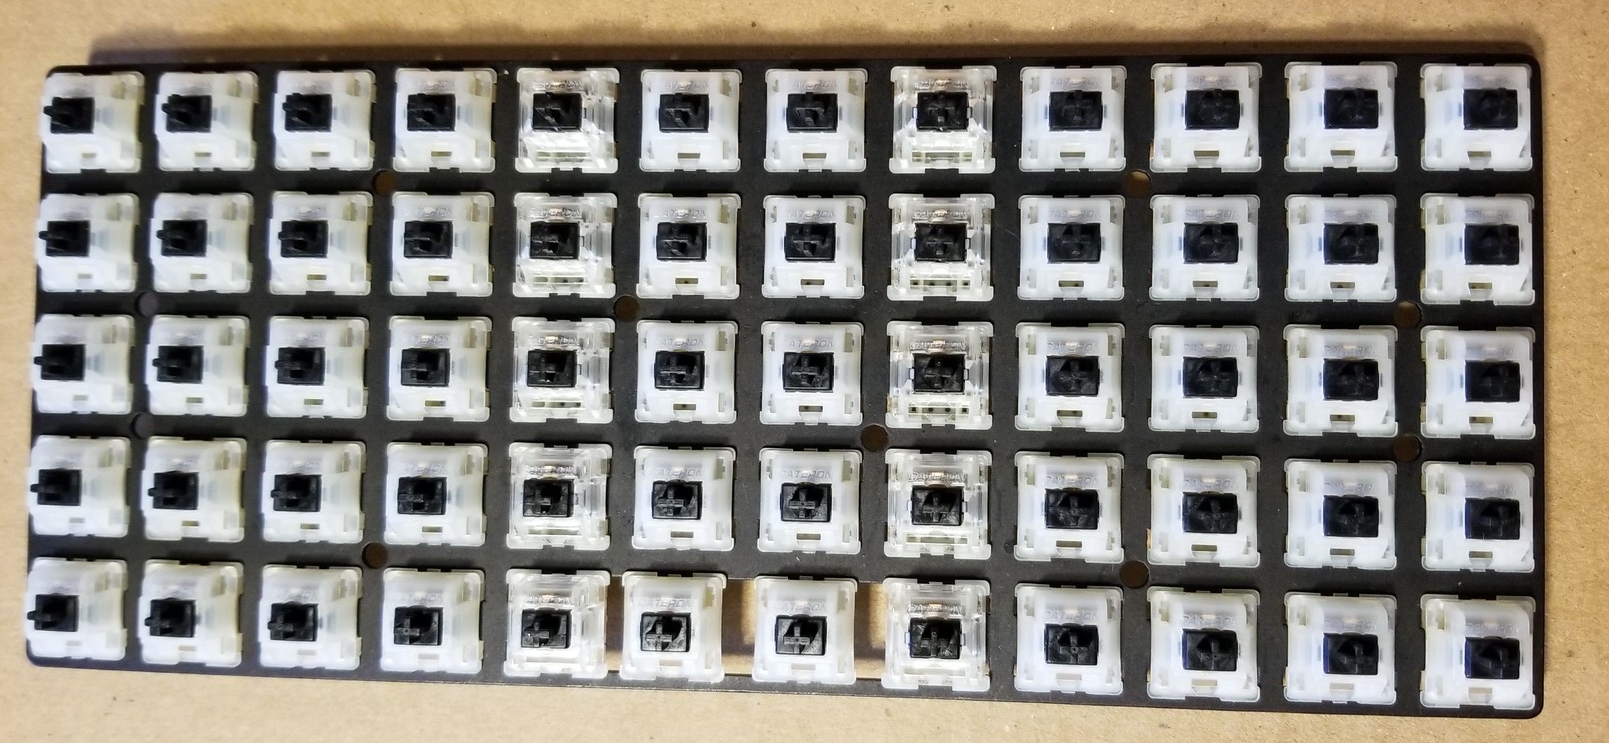 Switches, a top view